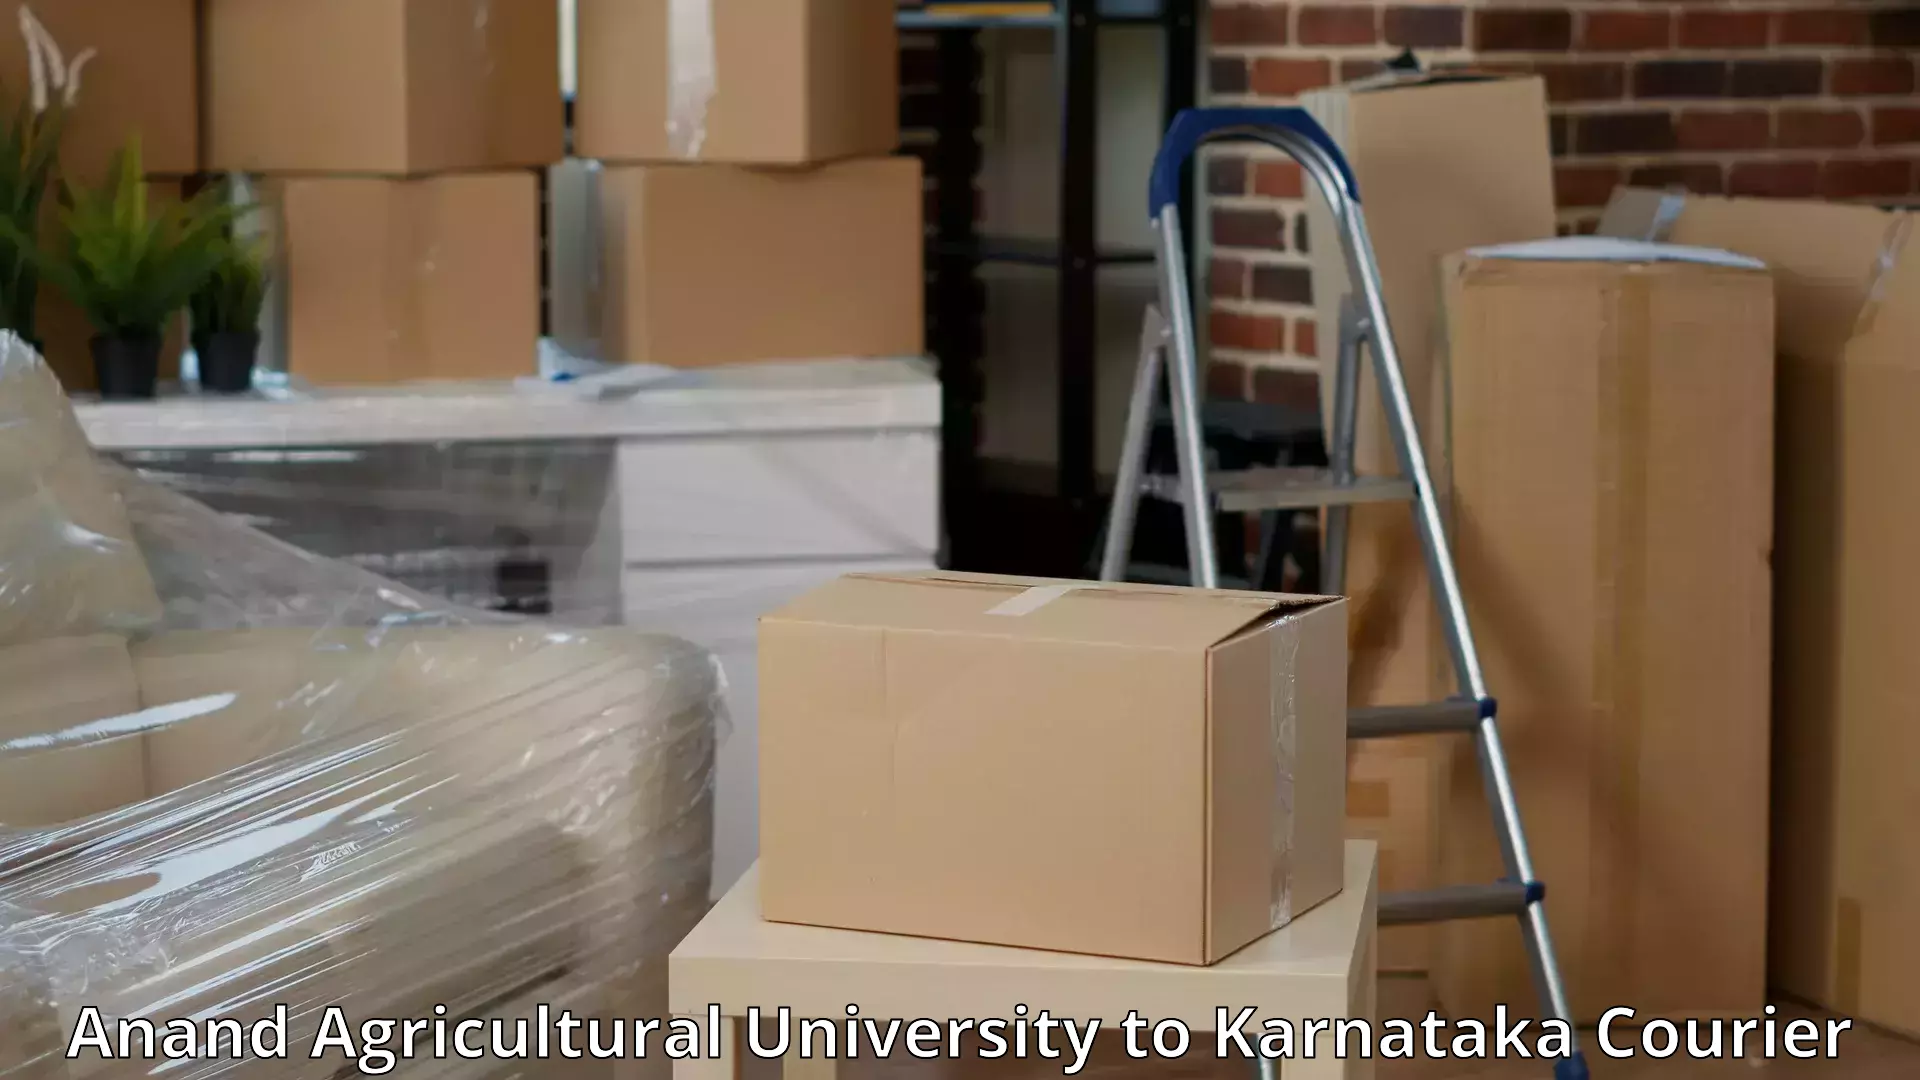 Efficient home movers Anand Agricultural University to Saundatti Yallamma